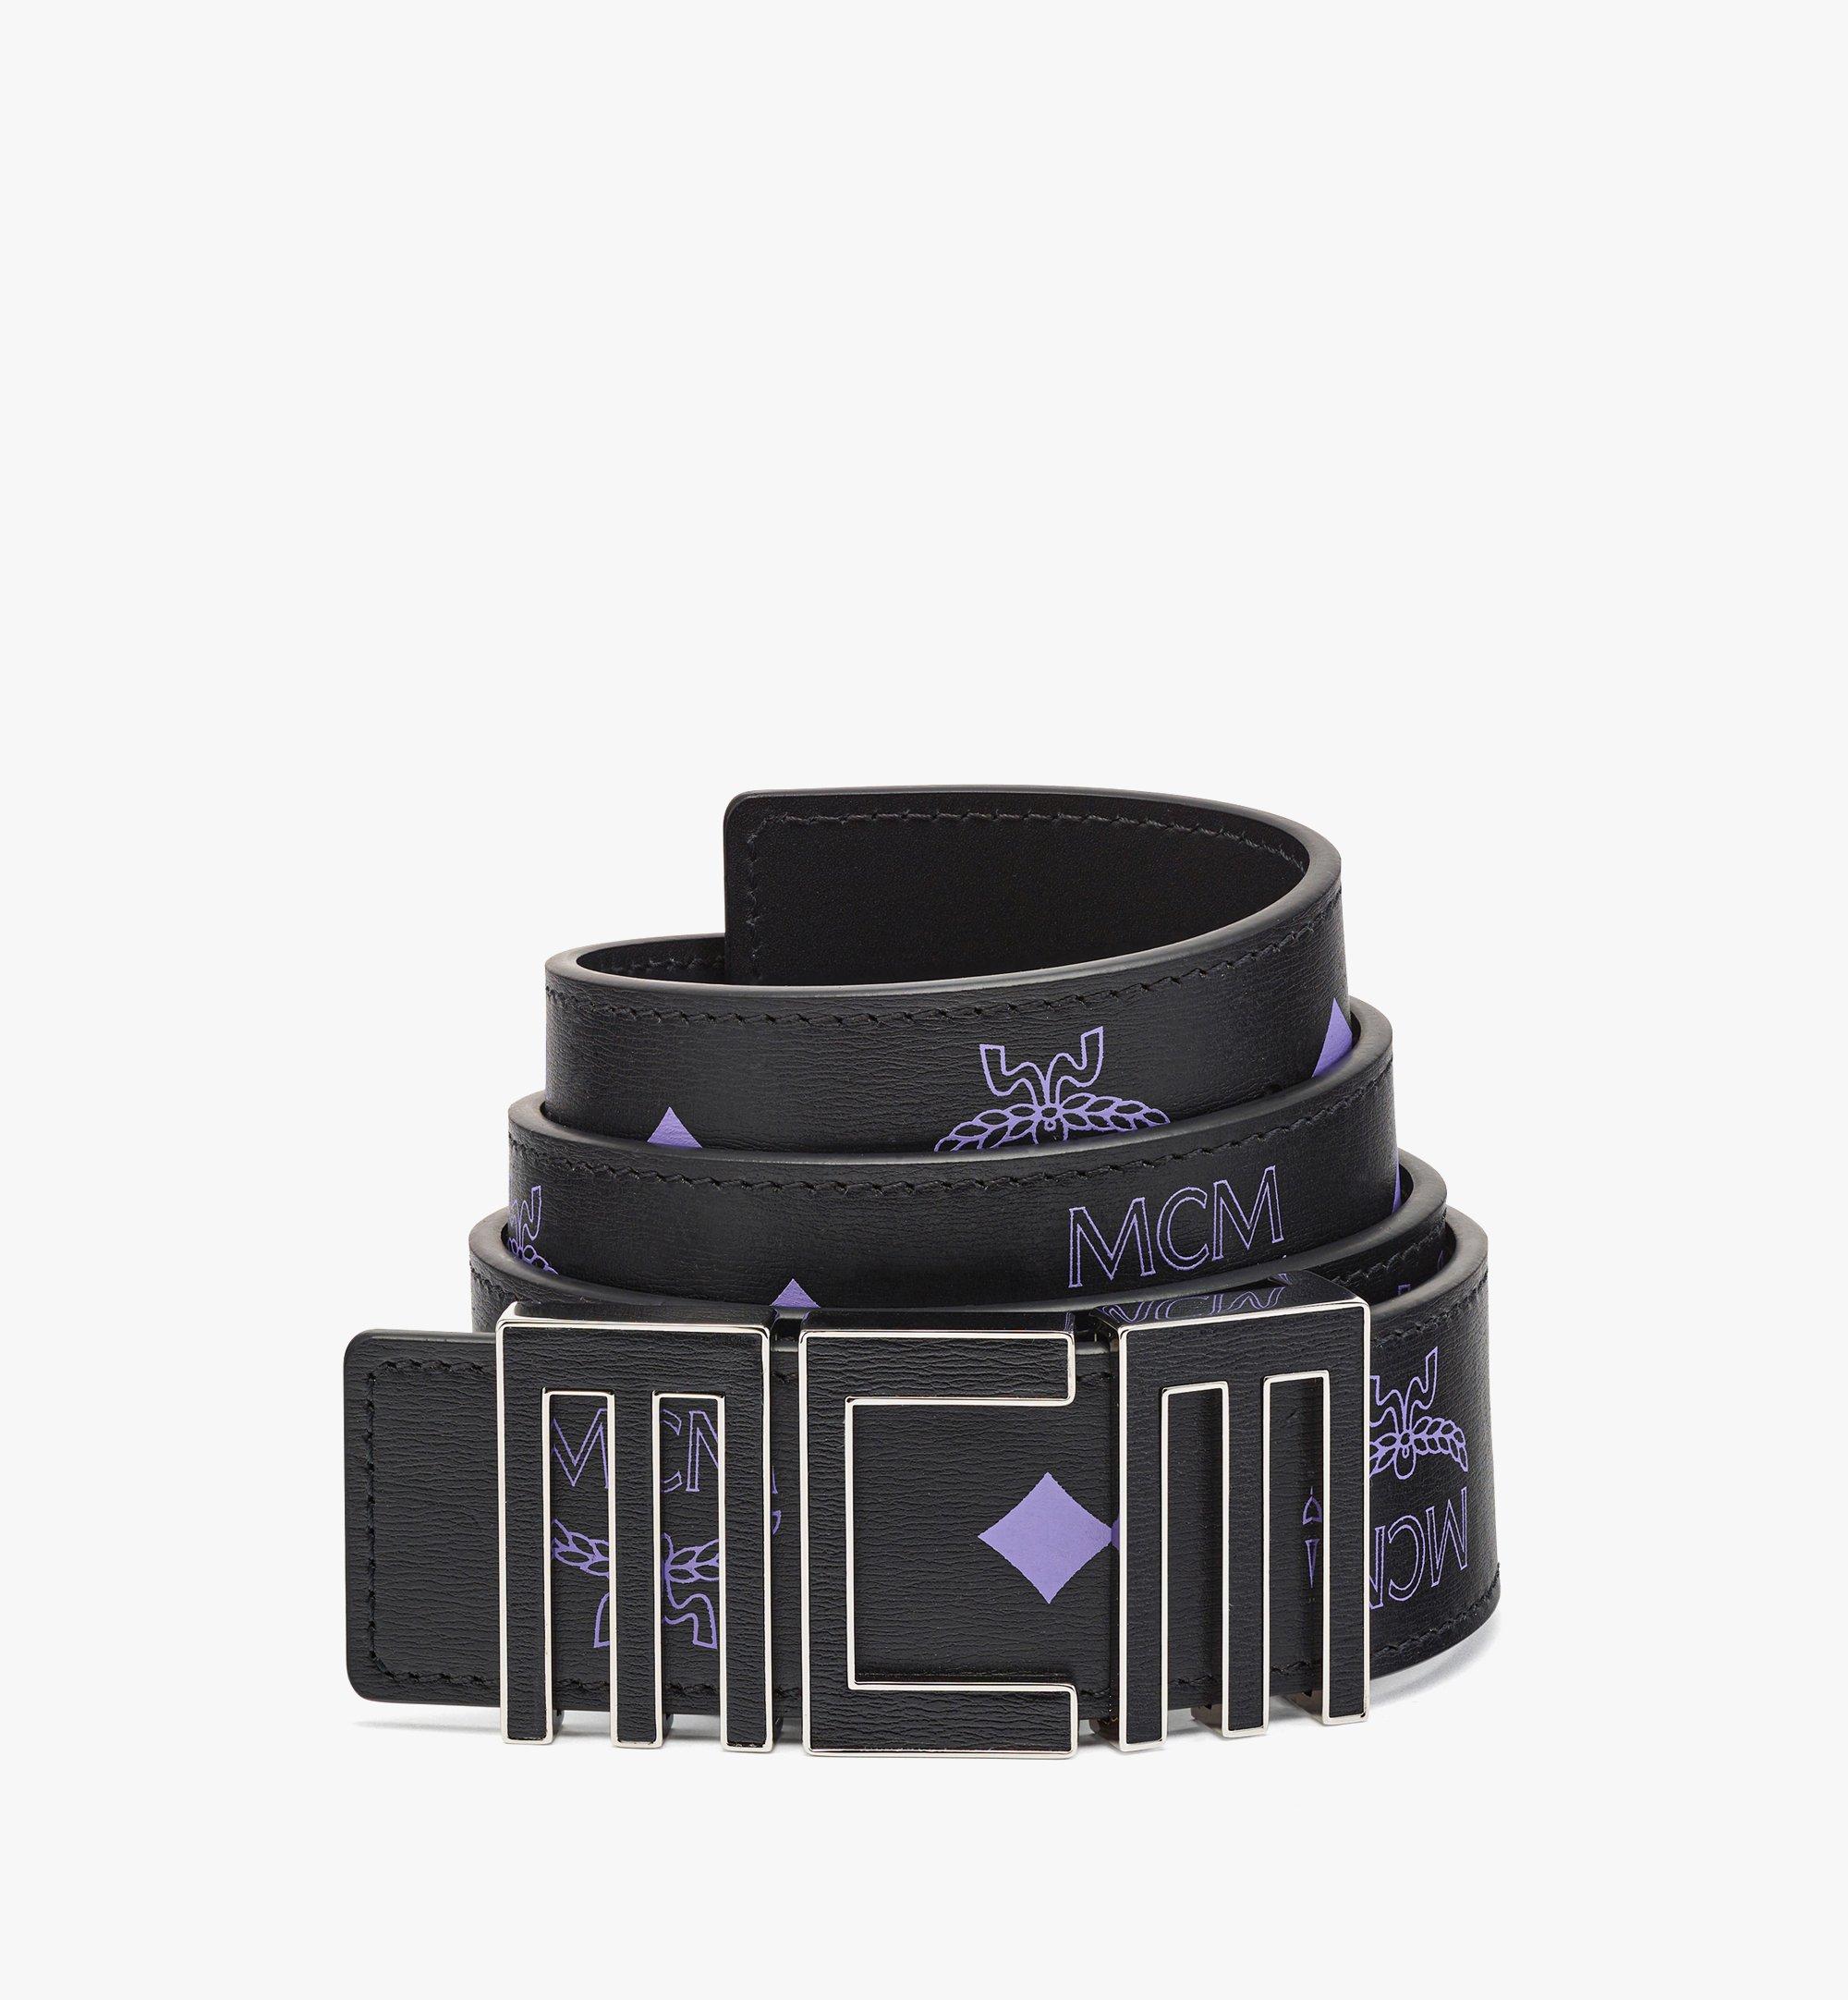 MCM Leather Inlay Tech MCM Belt 1.5” in Embossed Leather Purple MXBCSTC03U4110 Alternate View 1